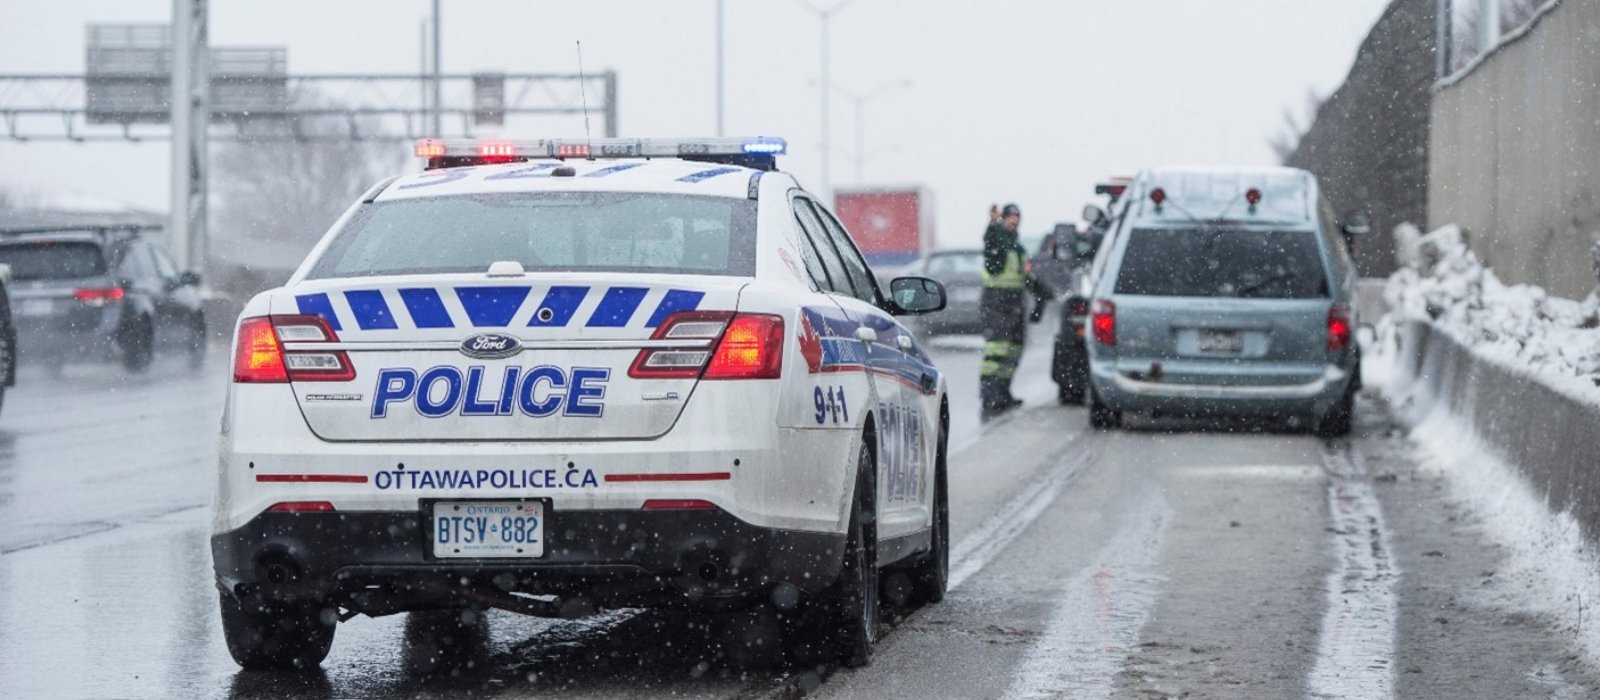 Police attend to a stalled vehicle on the Queensway